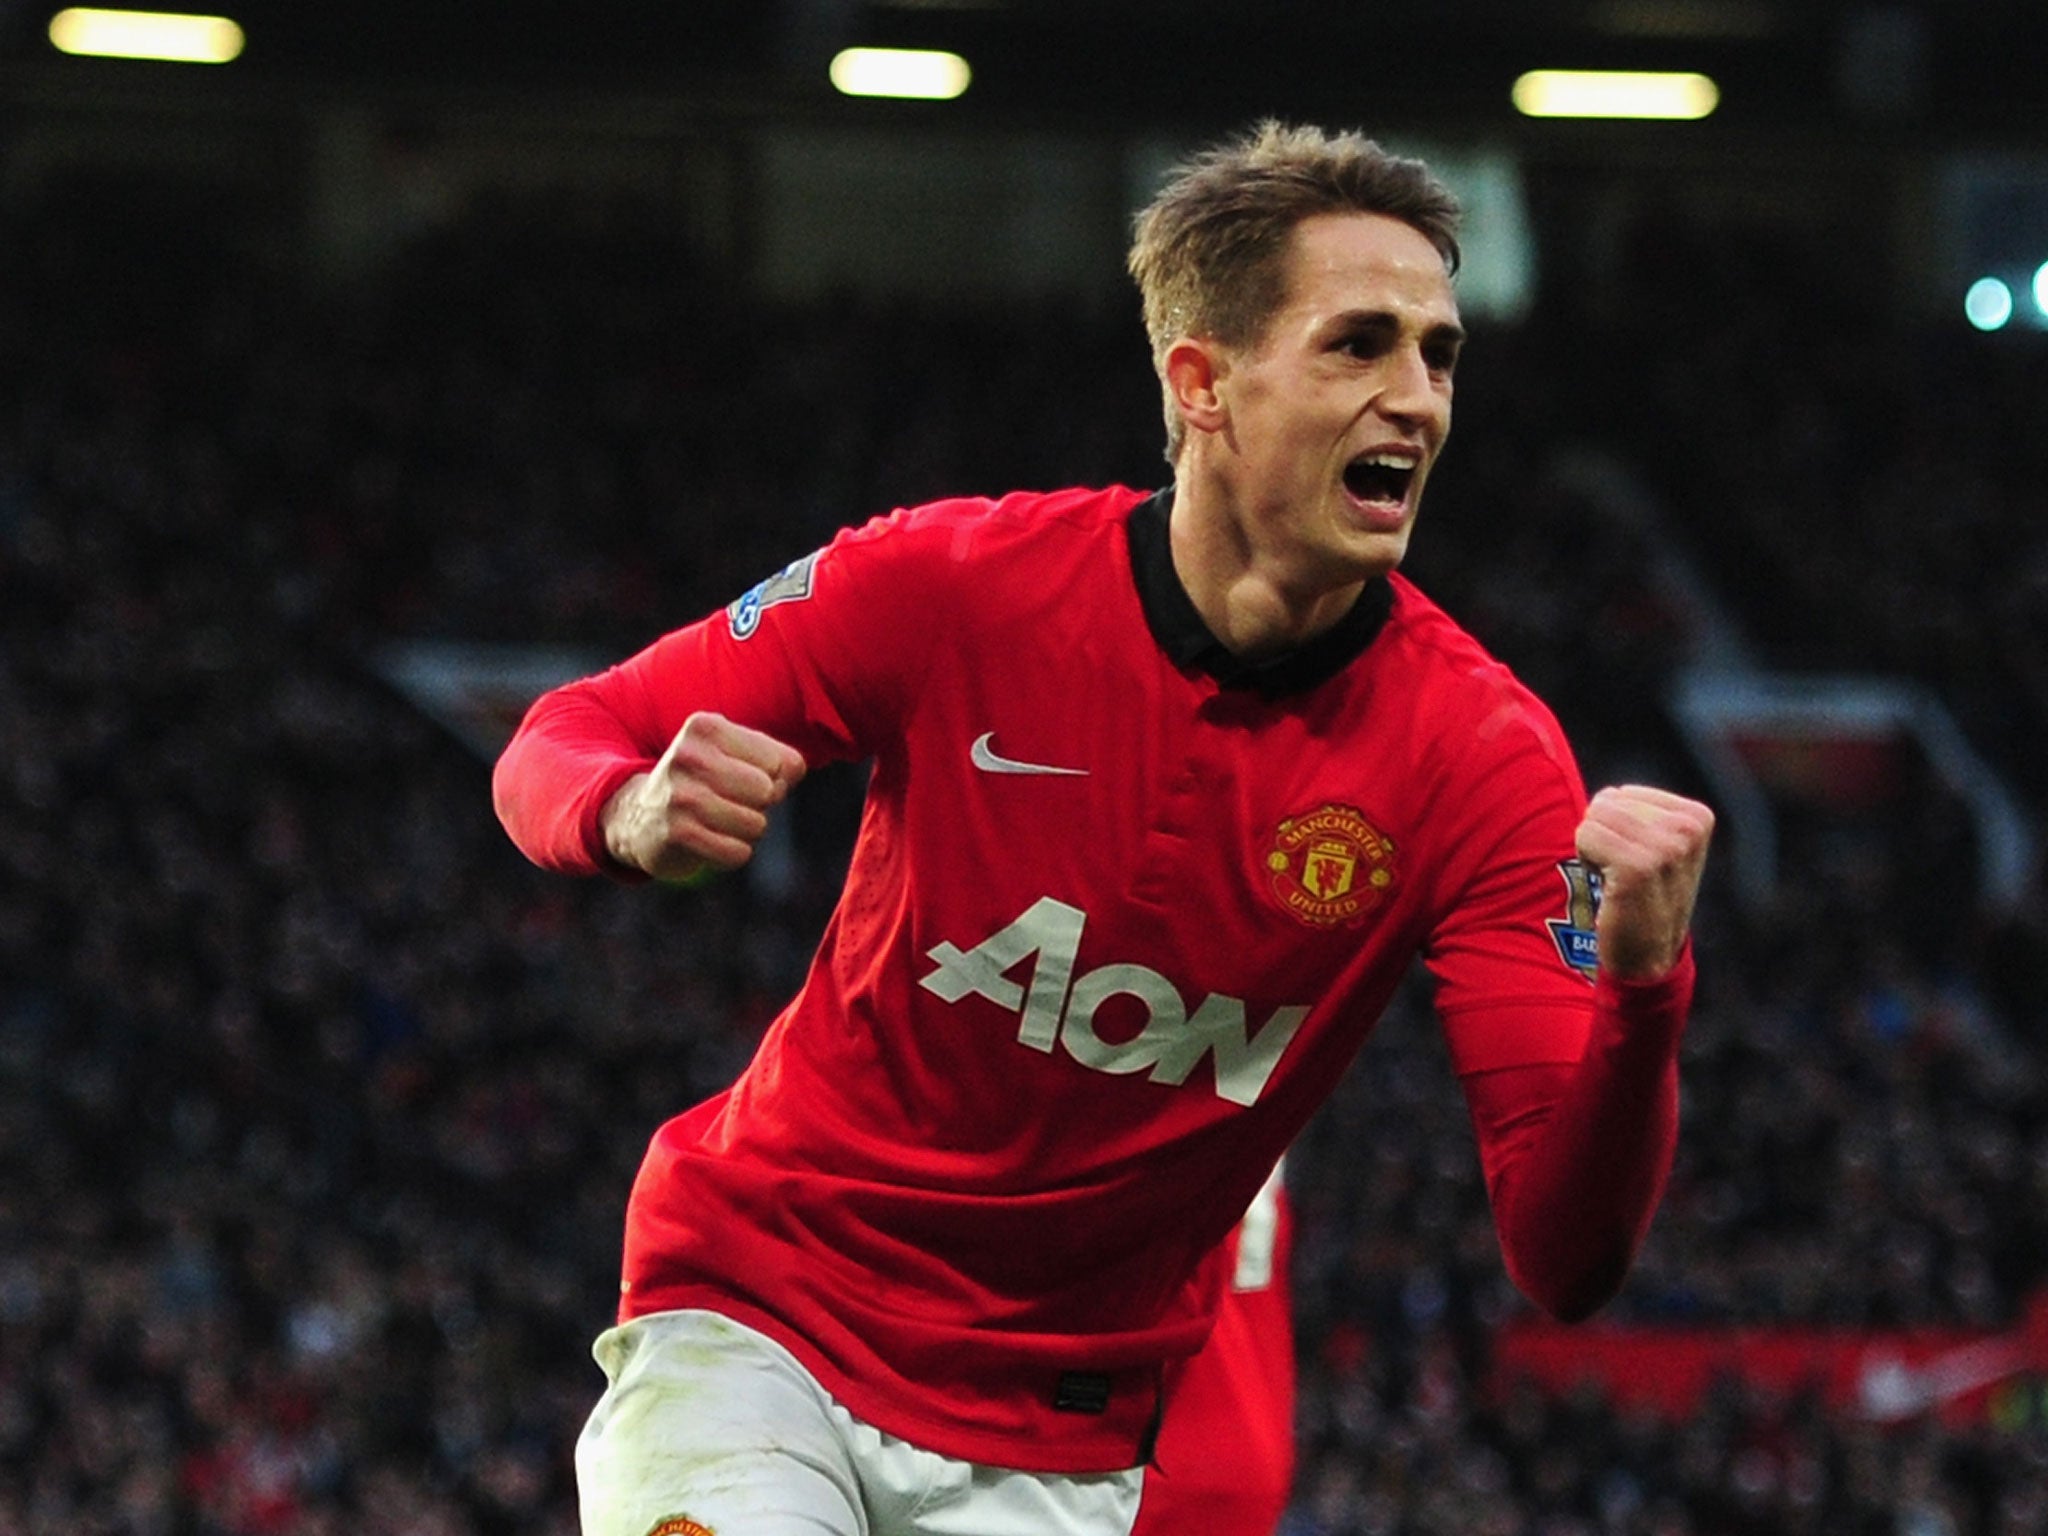 Adnan Januzaj reportedly took a student on a date to Nando's